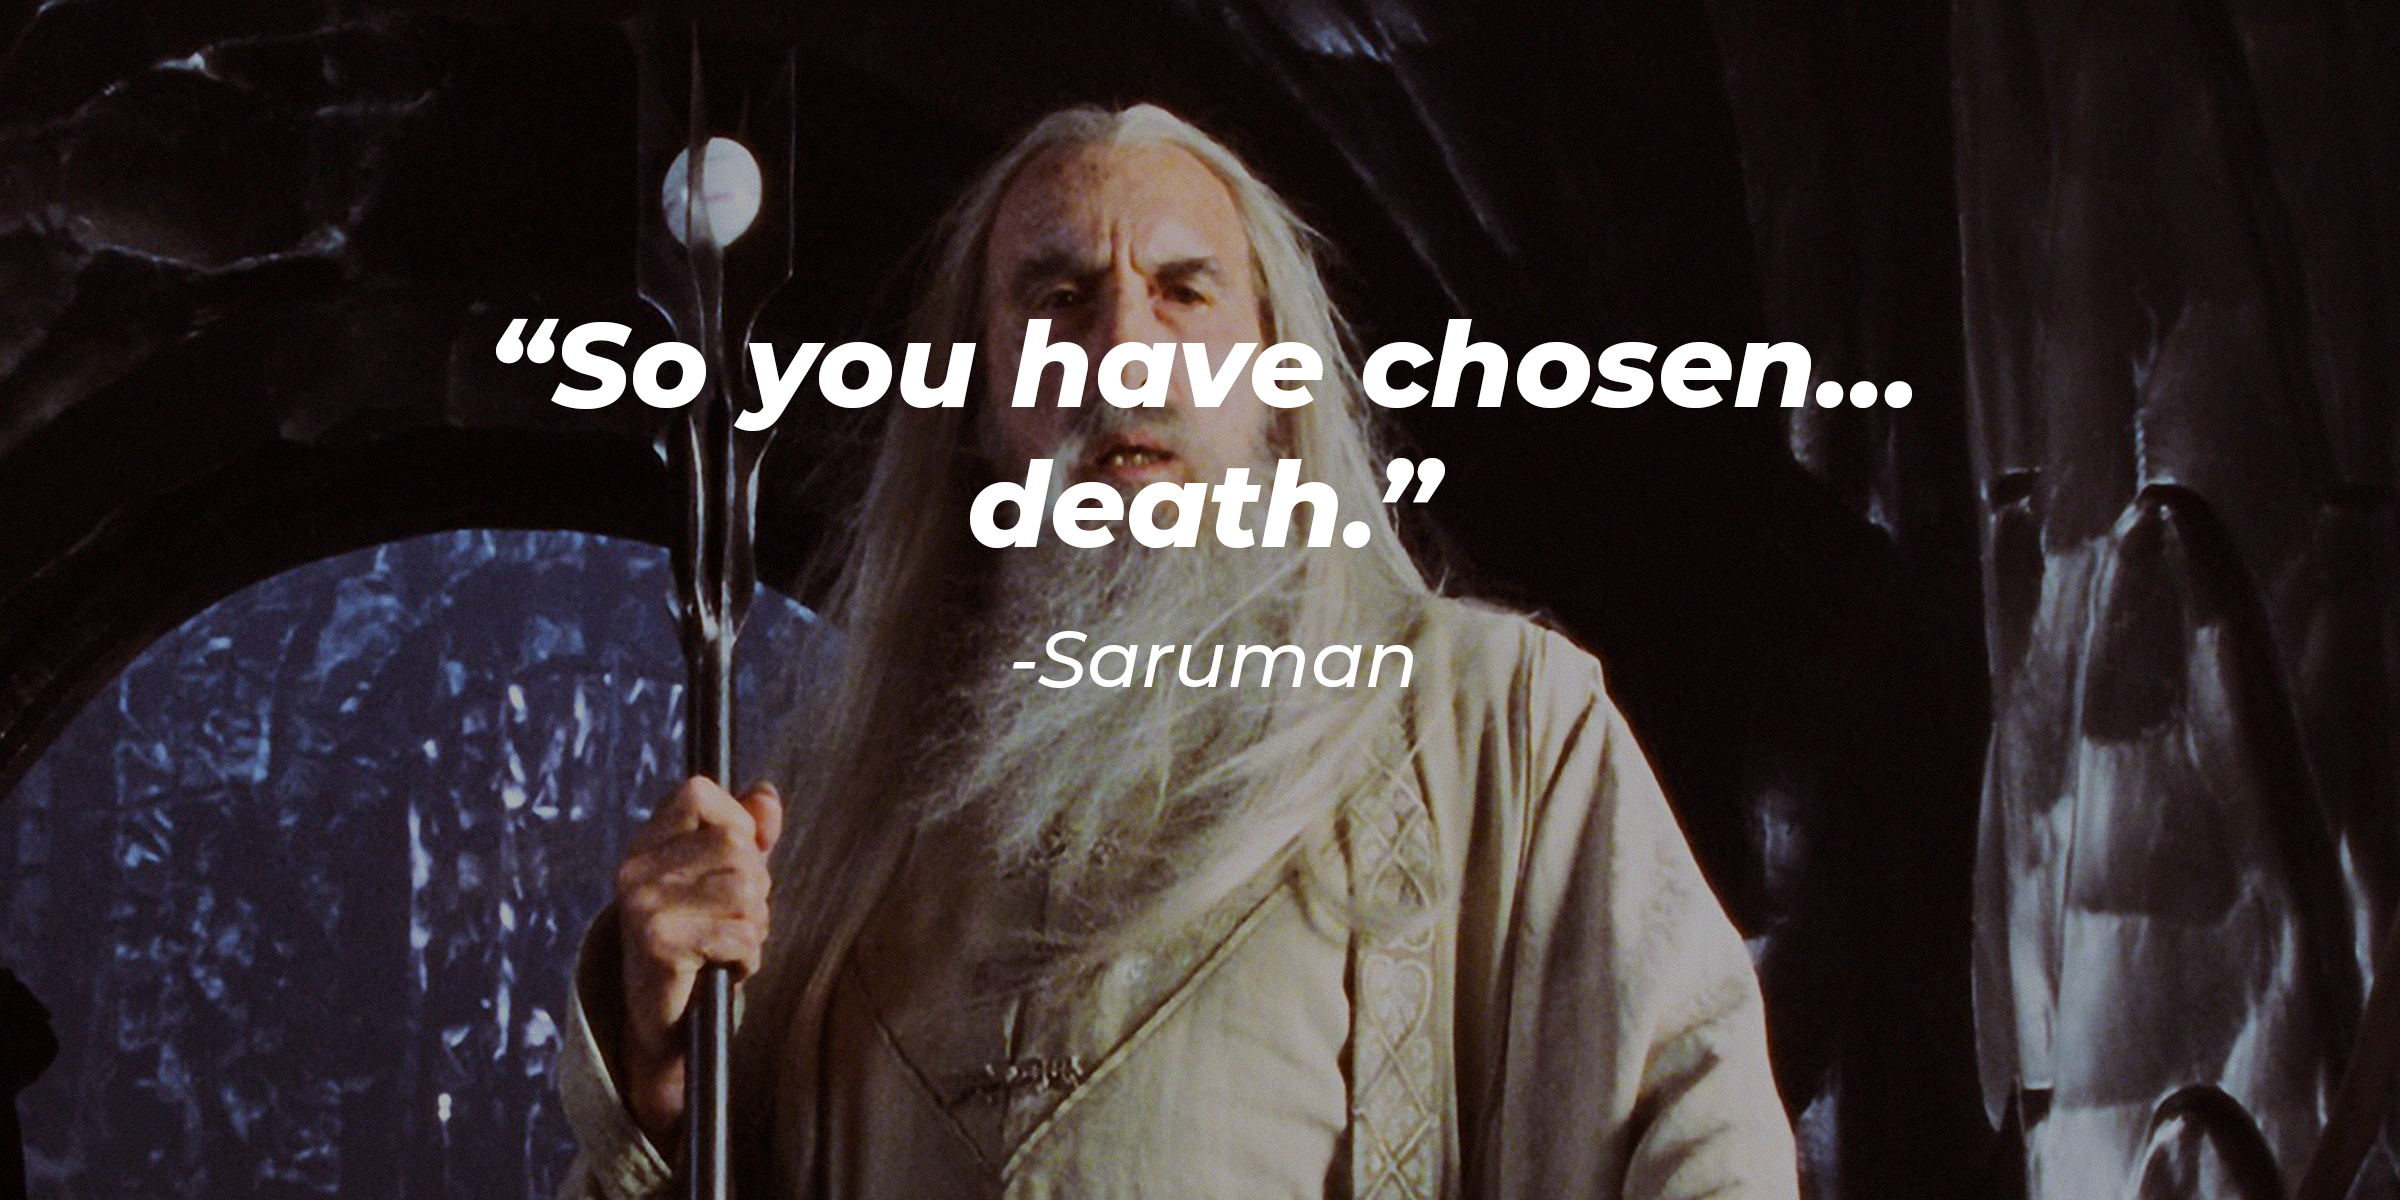 A photo of Saruman with Saruman's quote: “So you have chosen… death.” | Source: facebook.com/lordoftheringstrilogy